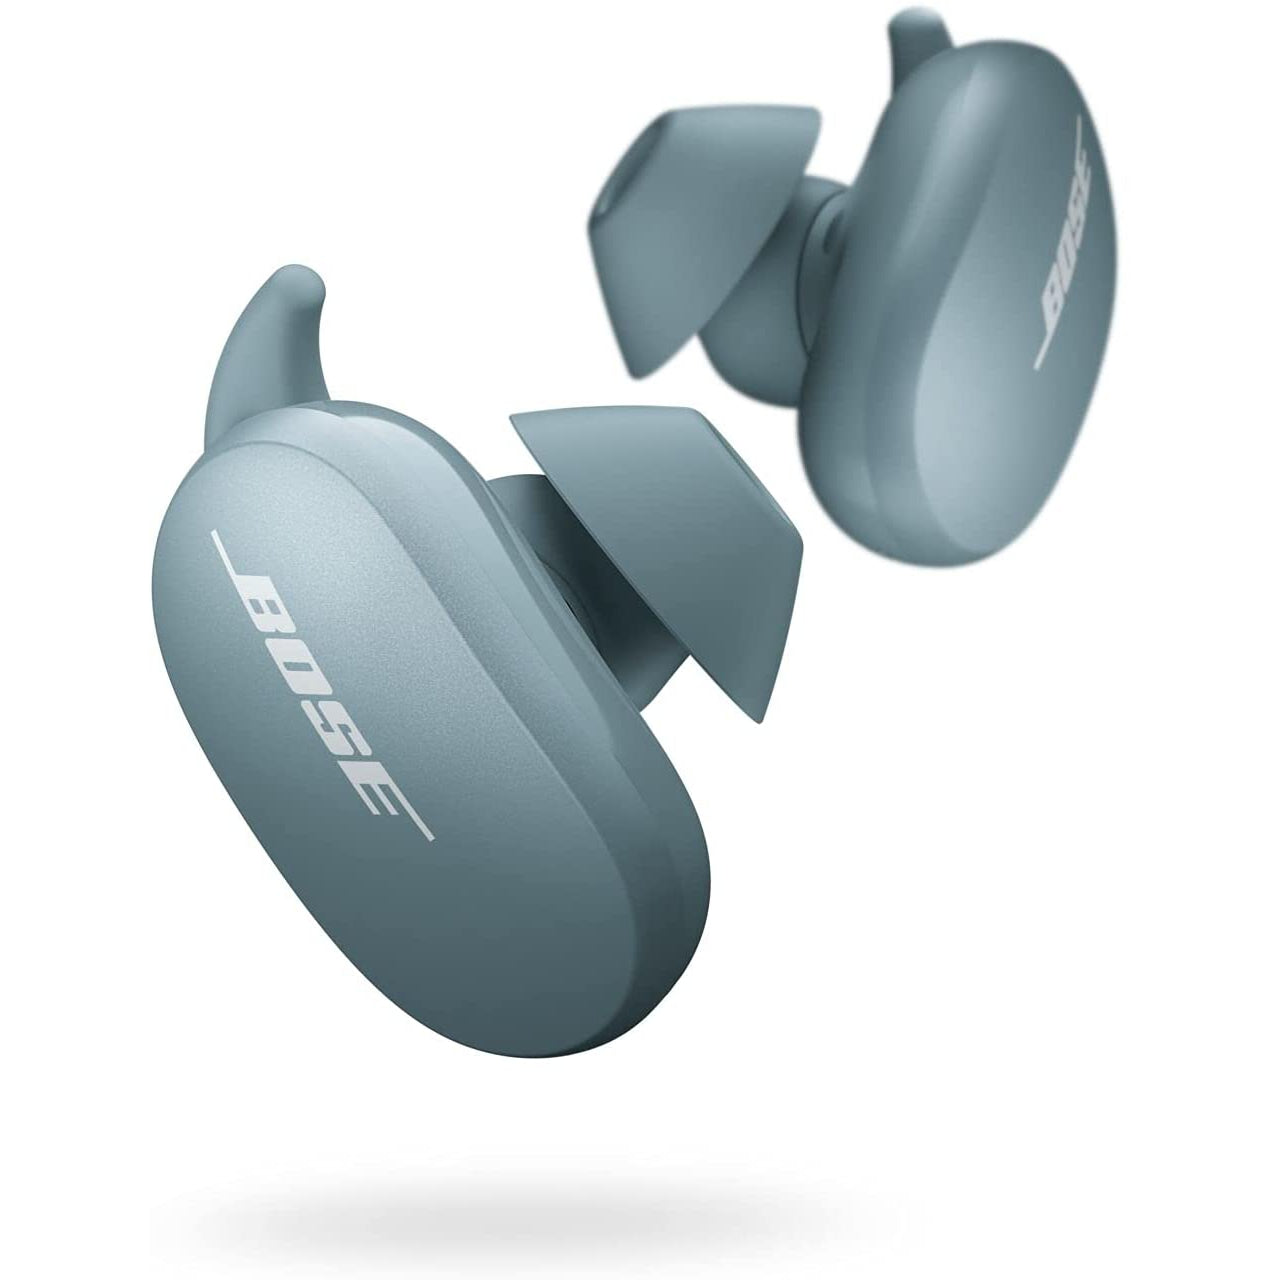 Bose QuietComfort Wireless Bluetooth Noise-Cancelling Earbuds - Stone Blue - Refurbished Pristine